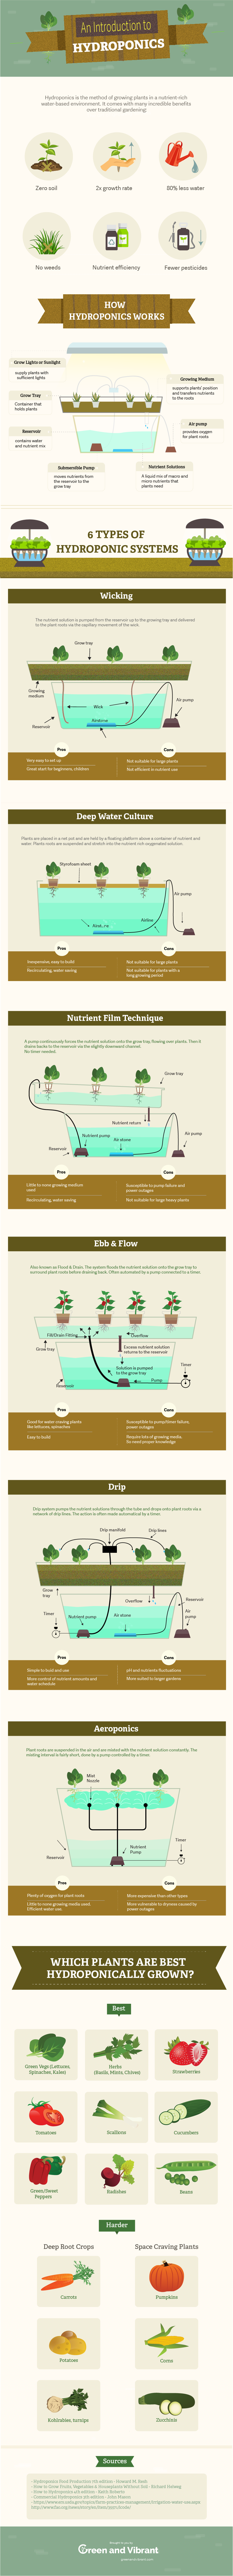 An Introduction to Hydroponics infographic